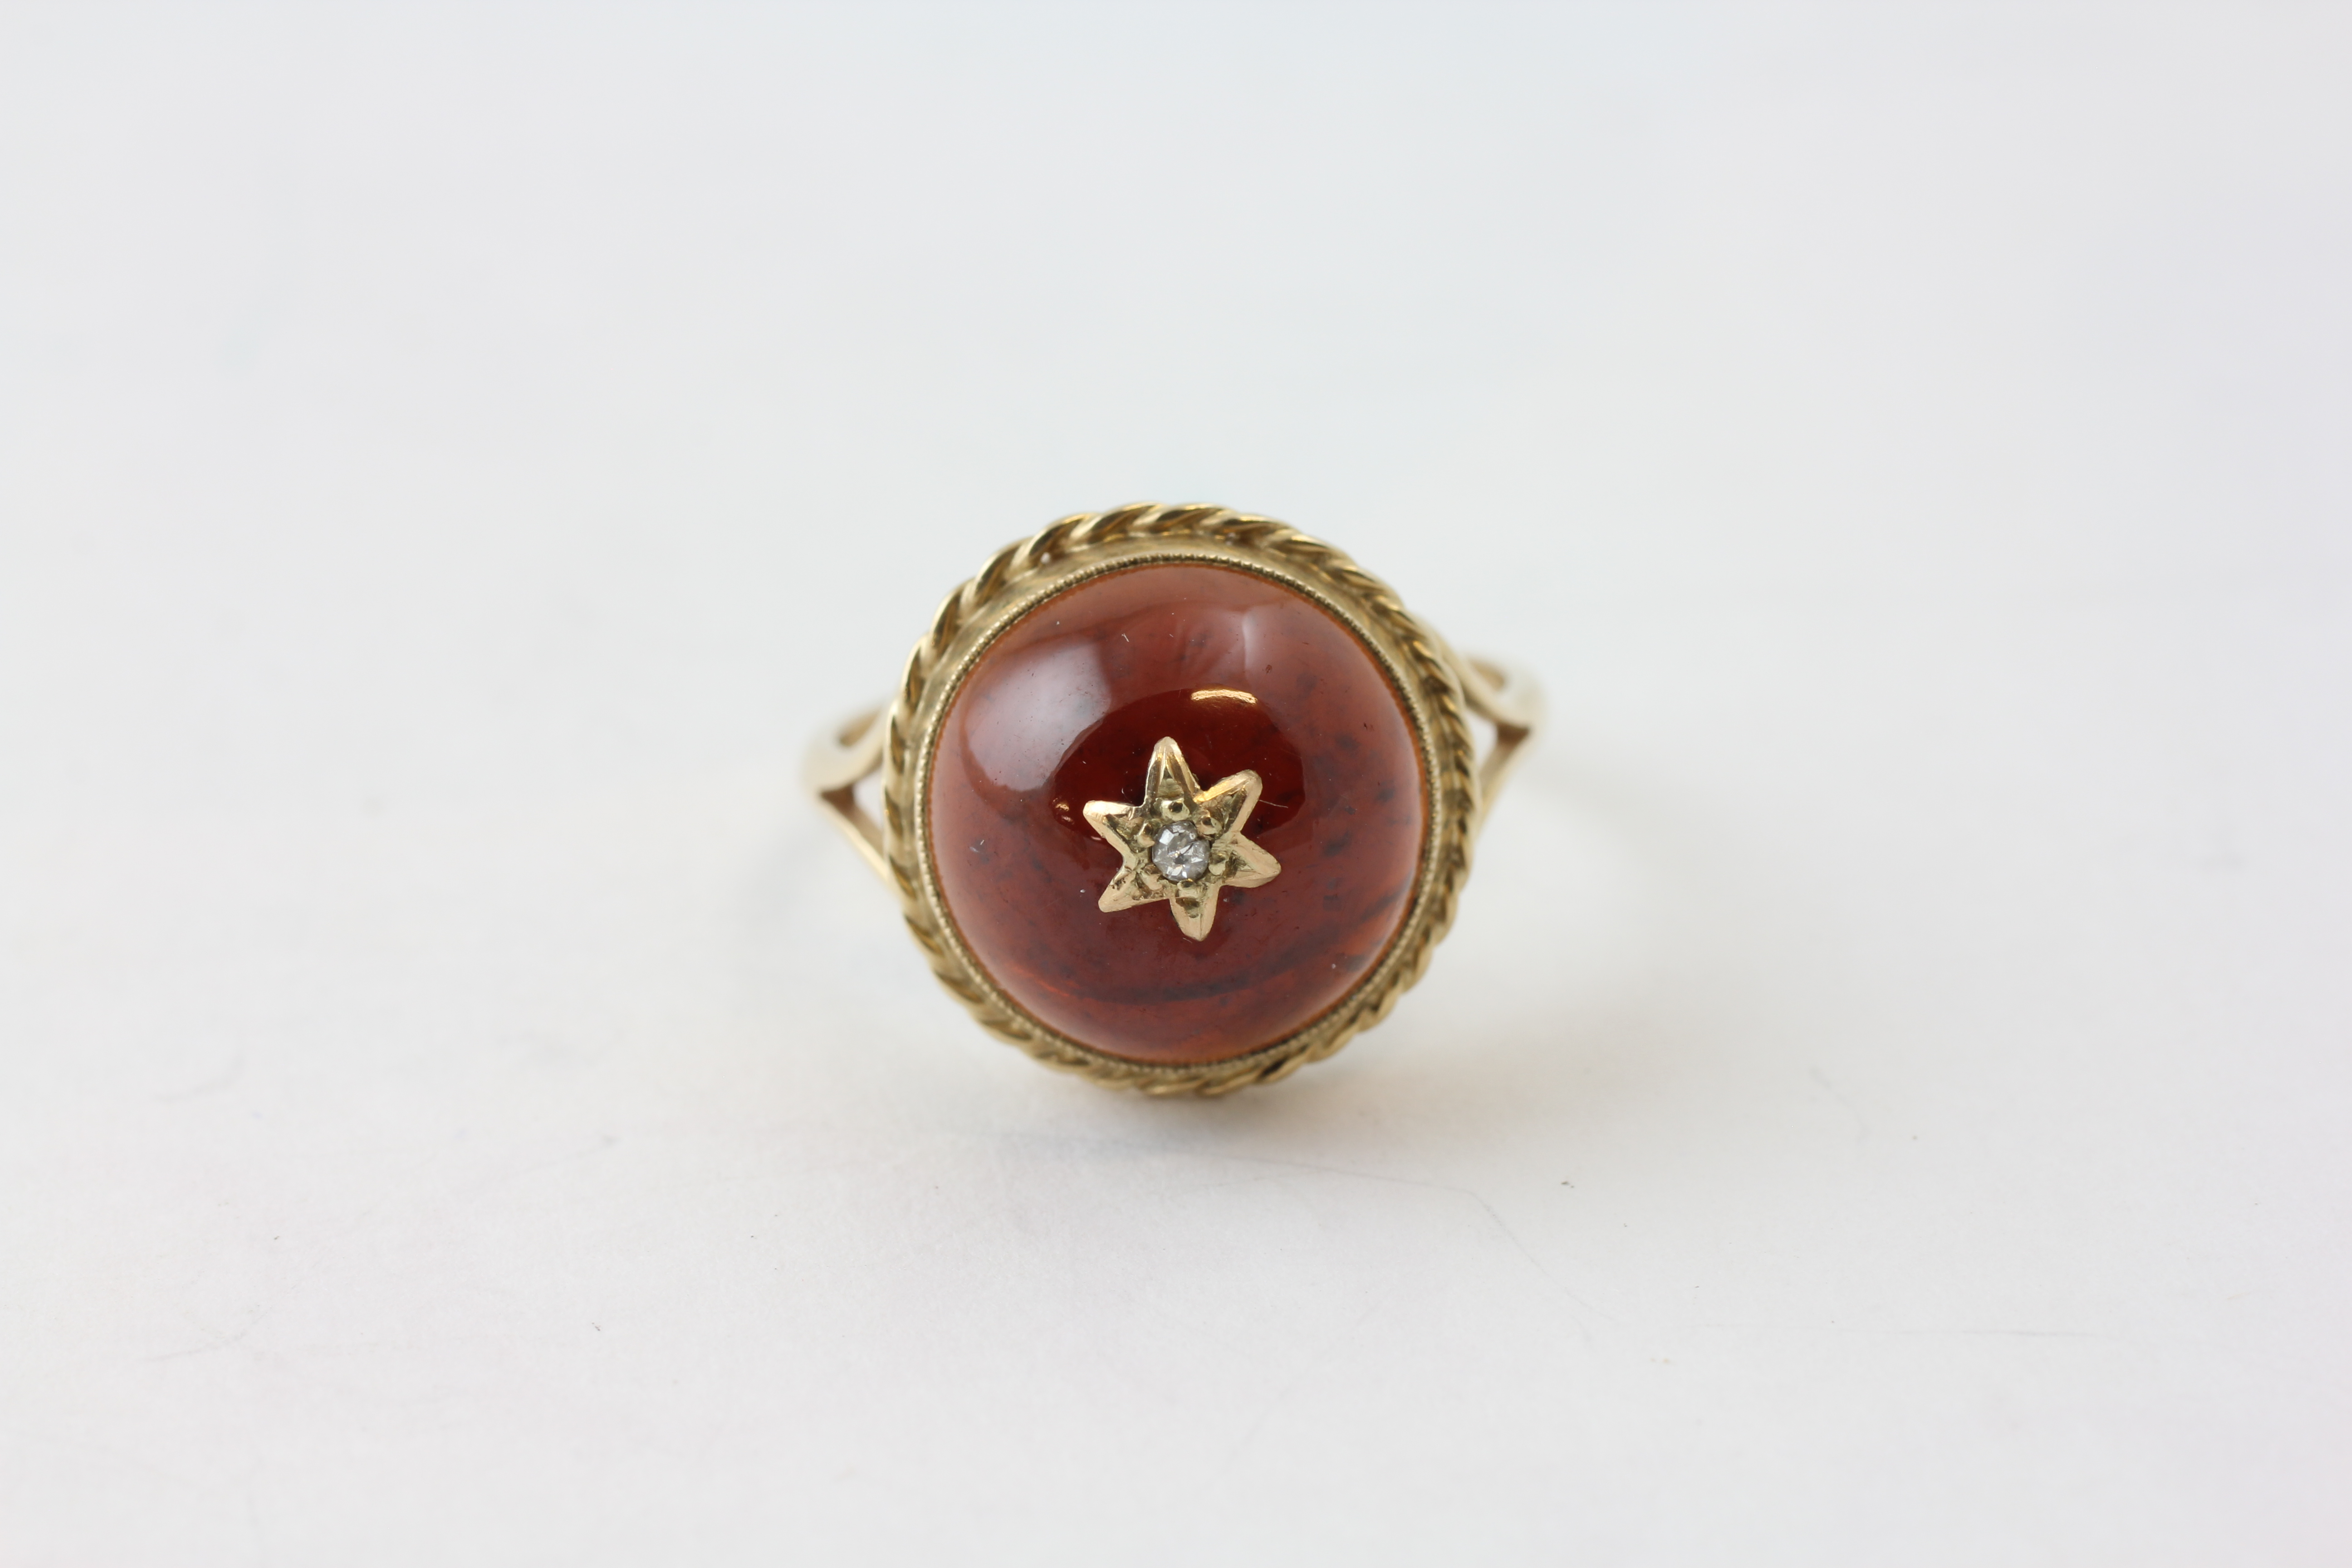 A 9CT GOLD RING SET WITH A PALE RED CABOCHON, MOUNTED WITH A DIAMOND,